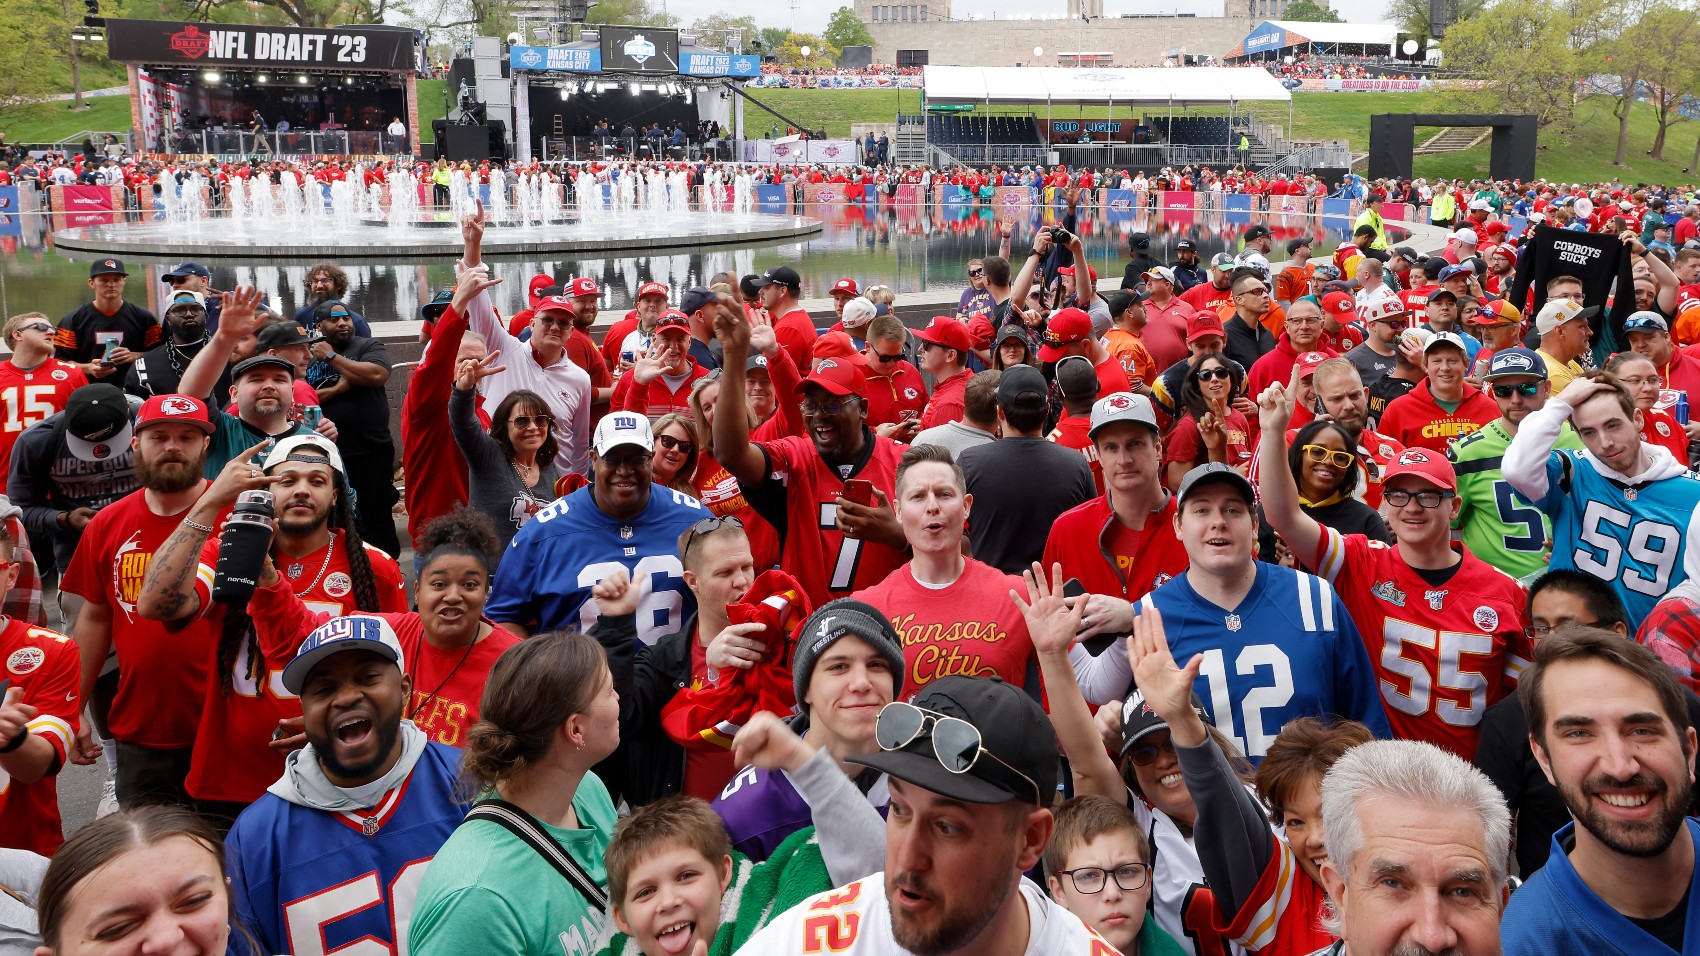 WATCH: NFL Fans At 2023 Draft Start ‘USA!’ Chant As Military Members Are Introduced